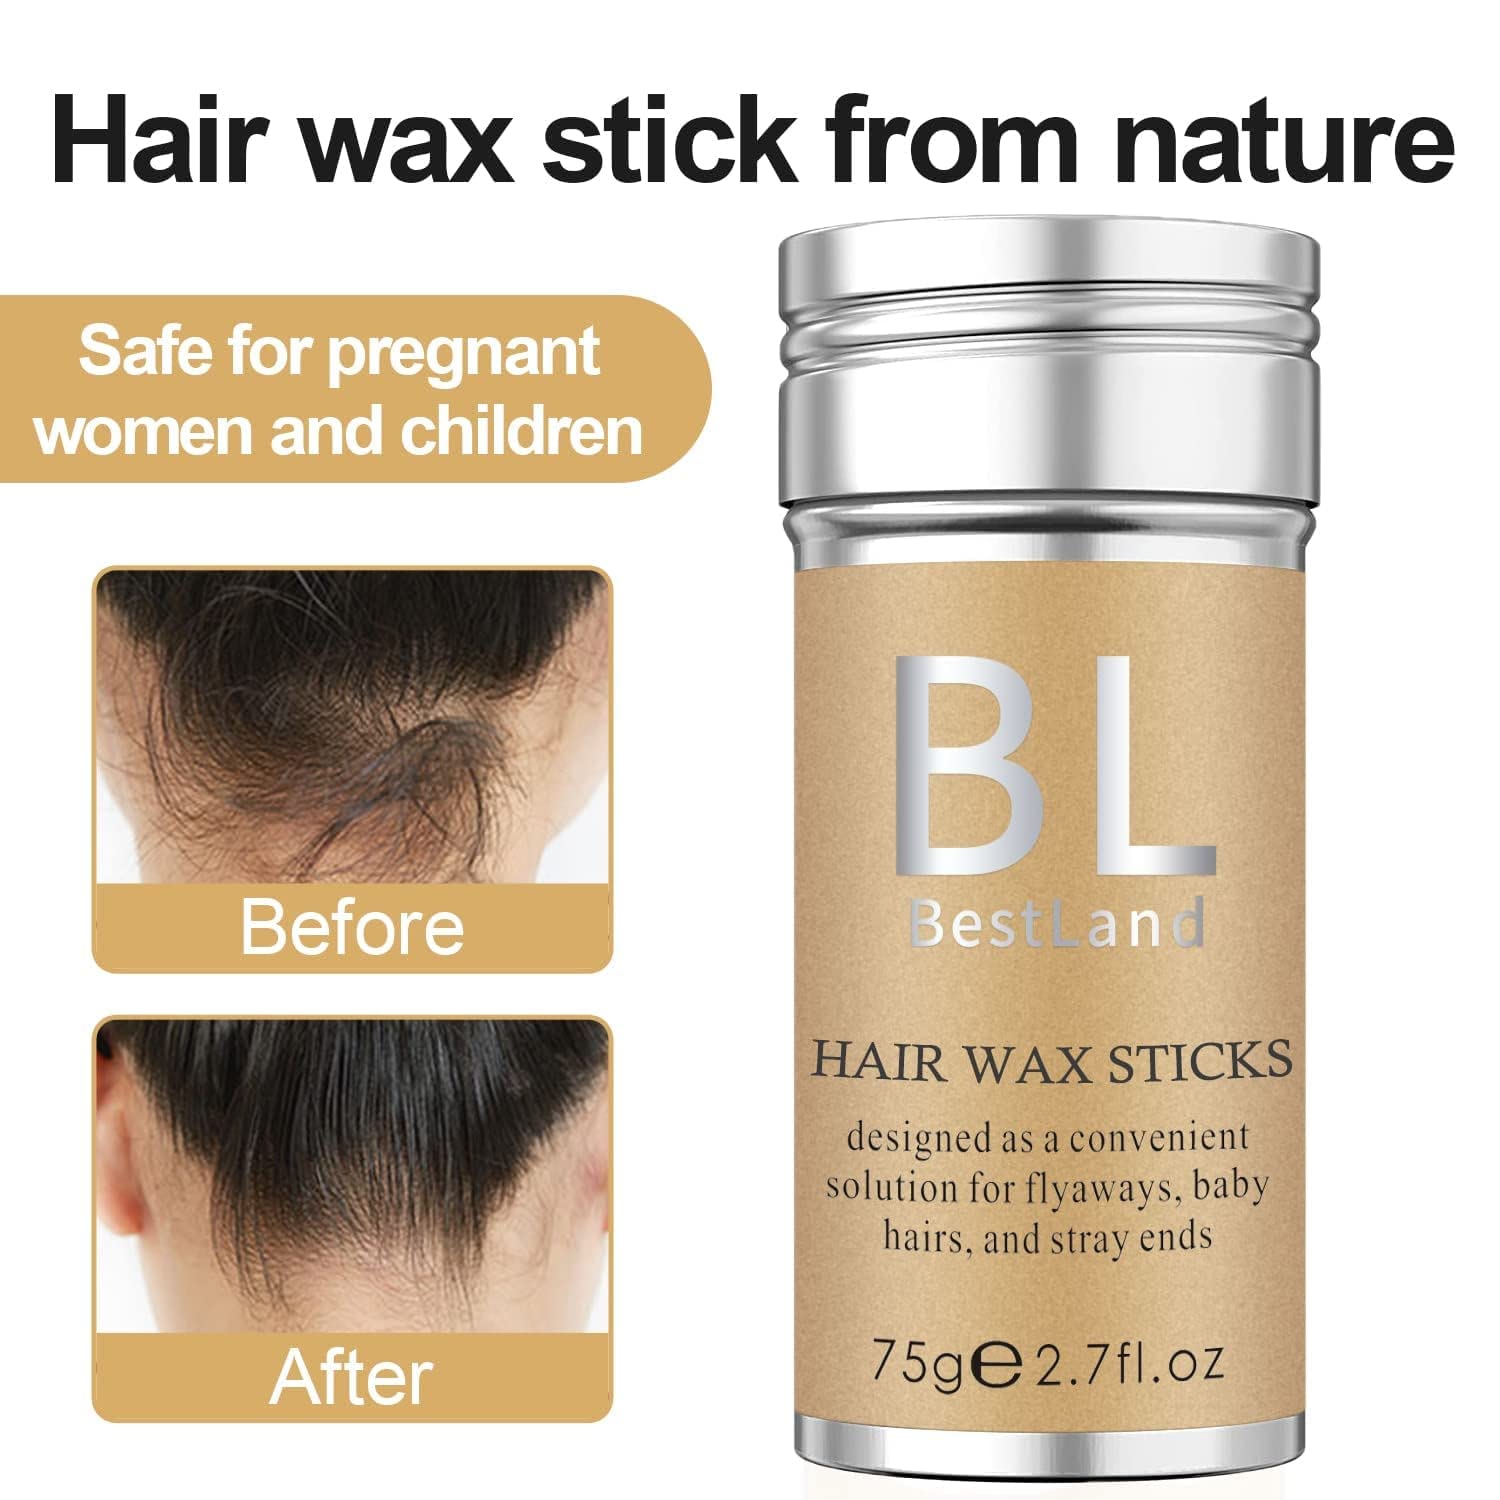 BestLand Hair Wax Stick, Flyaways Hair Stick Non-greasy Styling Wax Stick for Hair Edge Control Hair Finishing Slick Wax Stick Flyaways Edge Frizz Baby Hairs (2.7 Fl Oz (Pack of 1))